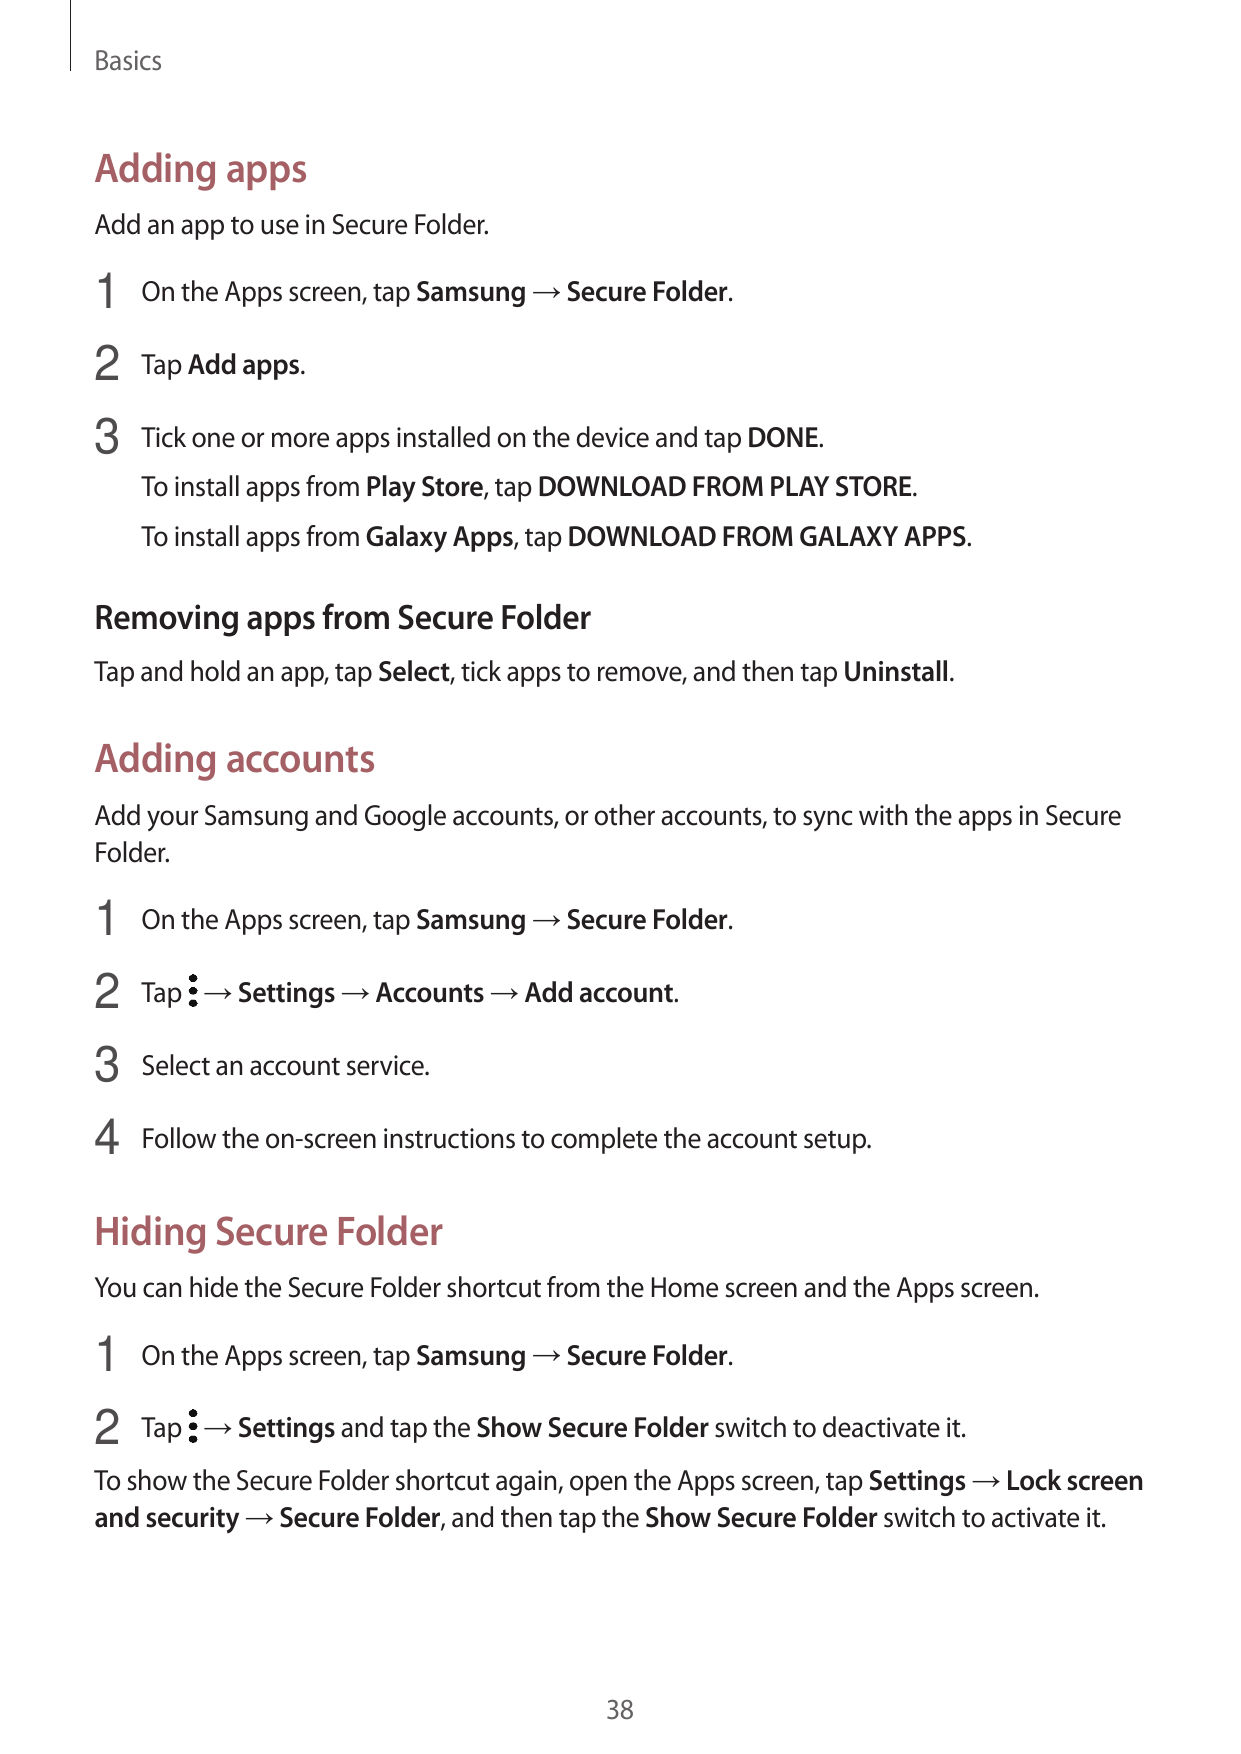 BasicsAdding appsAdd an app to use in Secure Folder.1 On the Apps screen, tap Samsung → Secure Folder.2 Tap Add apps.3 Tick one 